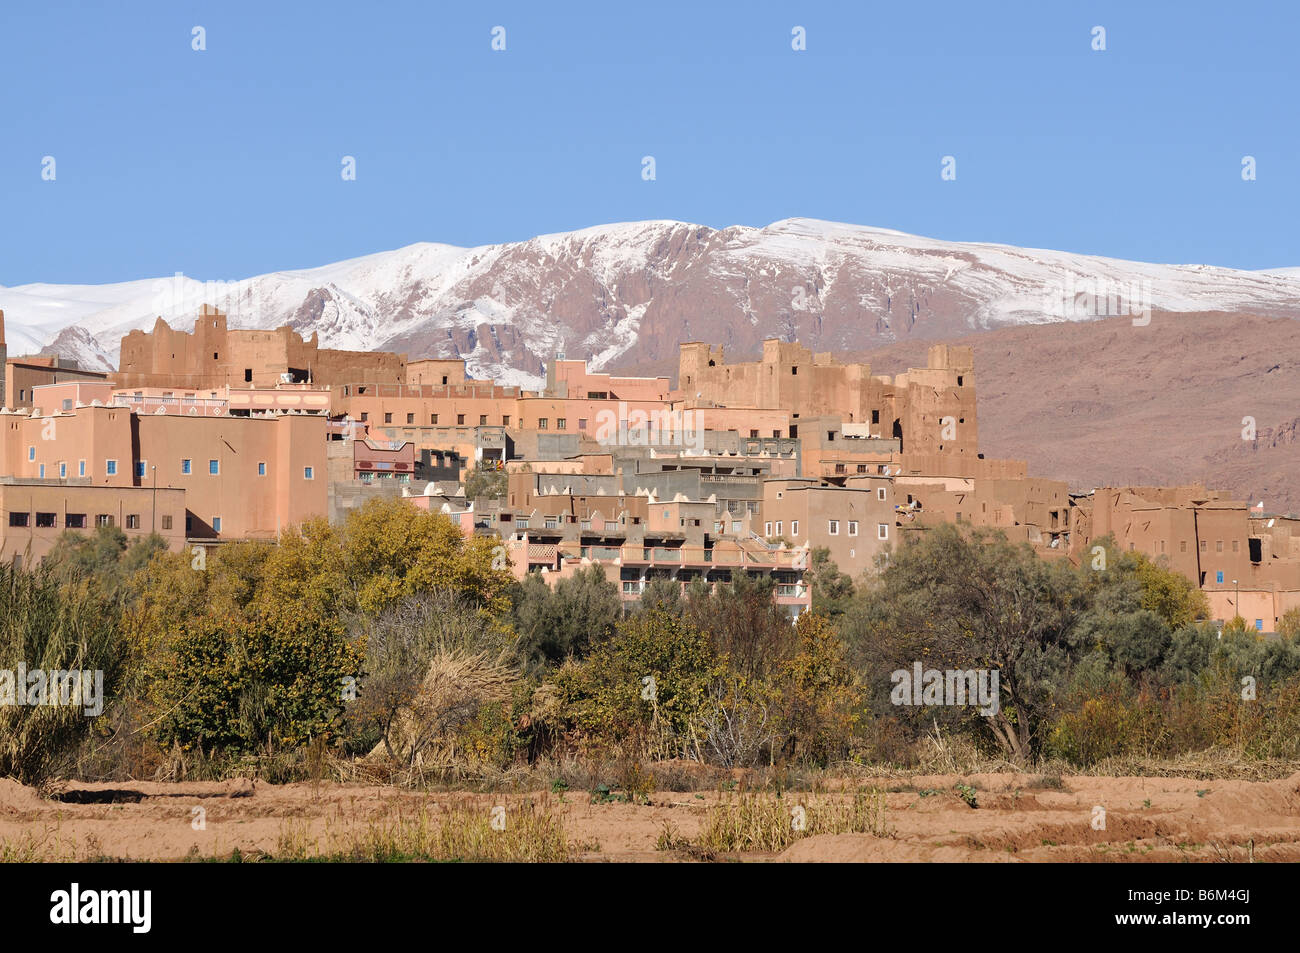 Moroccan village, Atlas mountains in the background Stock Photo